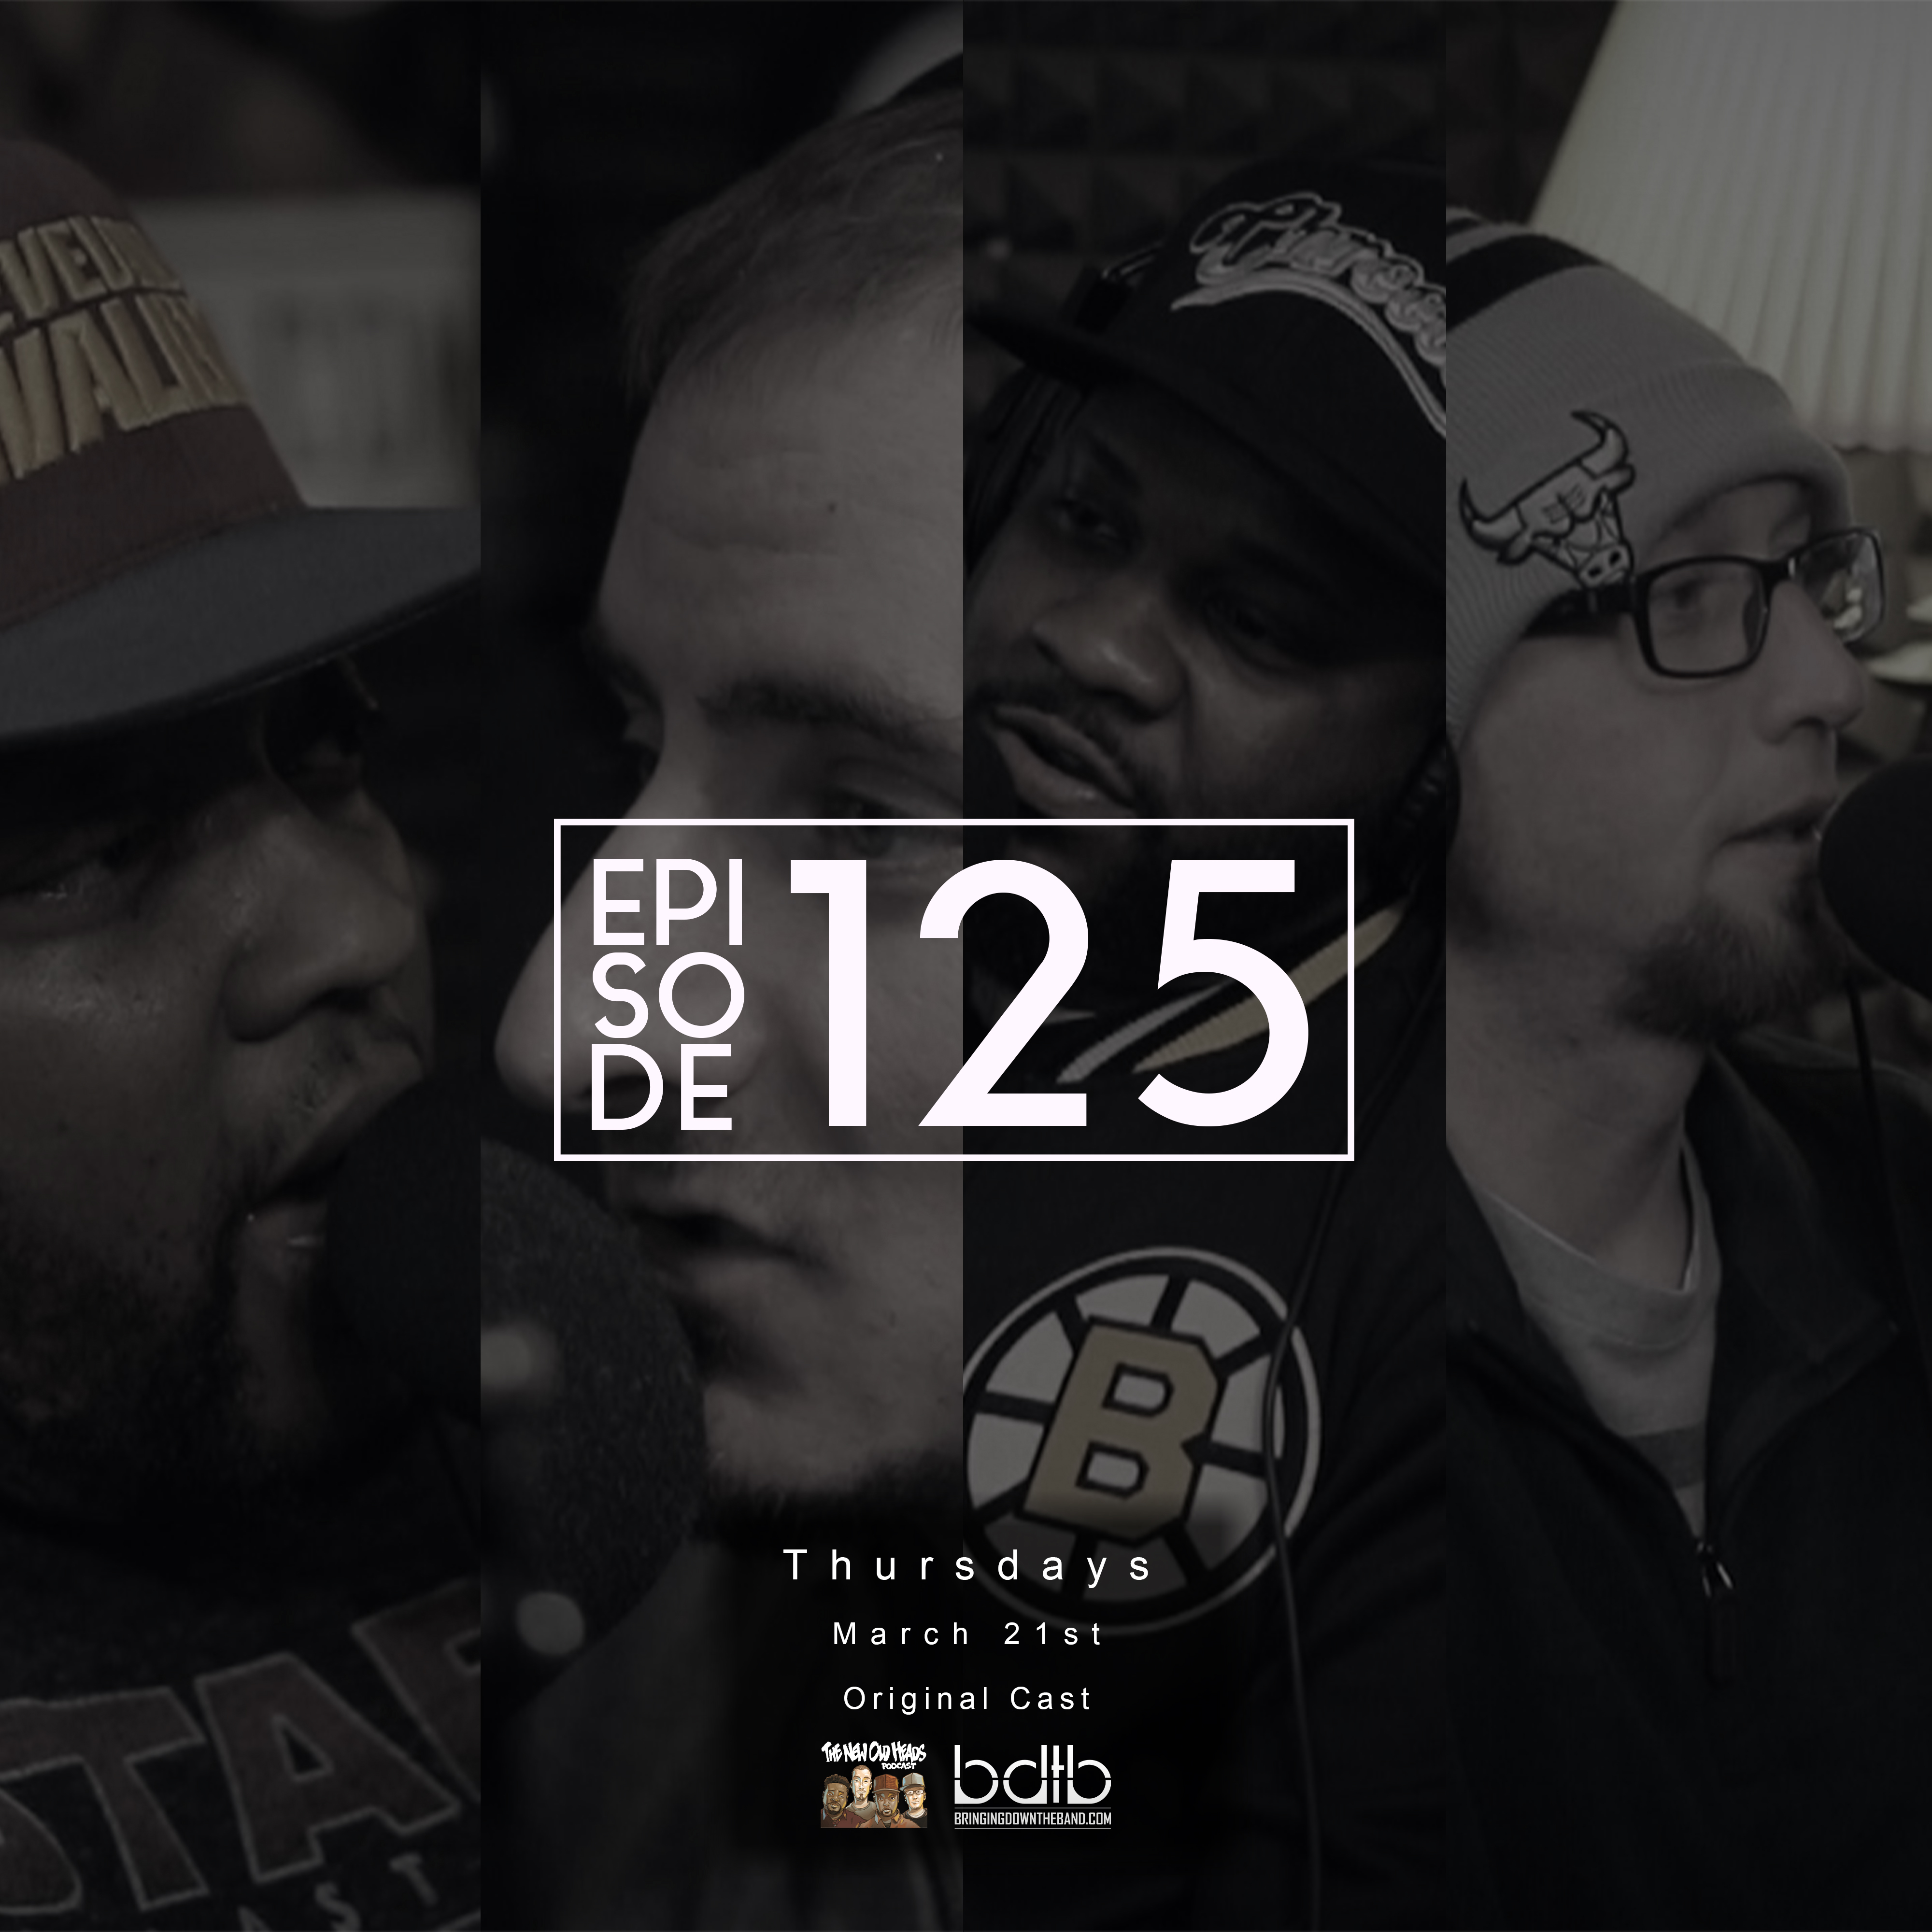 New Old Heads Podcast, Episode 125 | "What hip hop artists do you wish had better beats?"